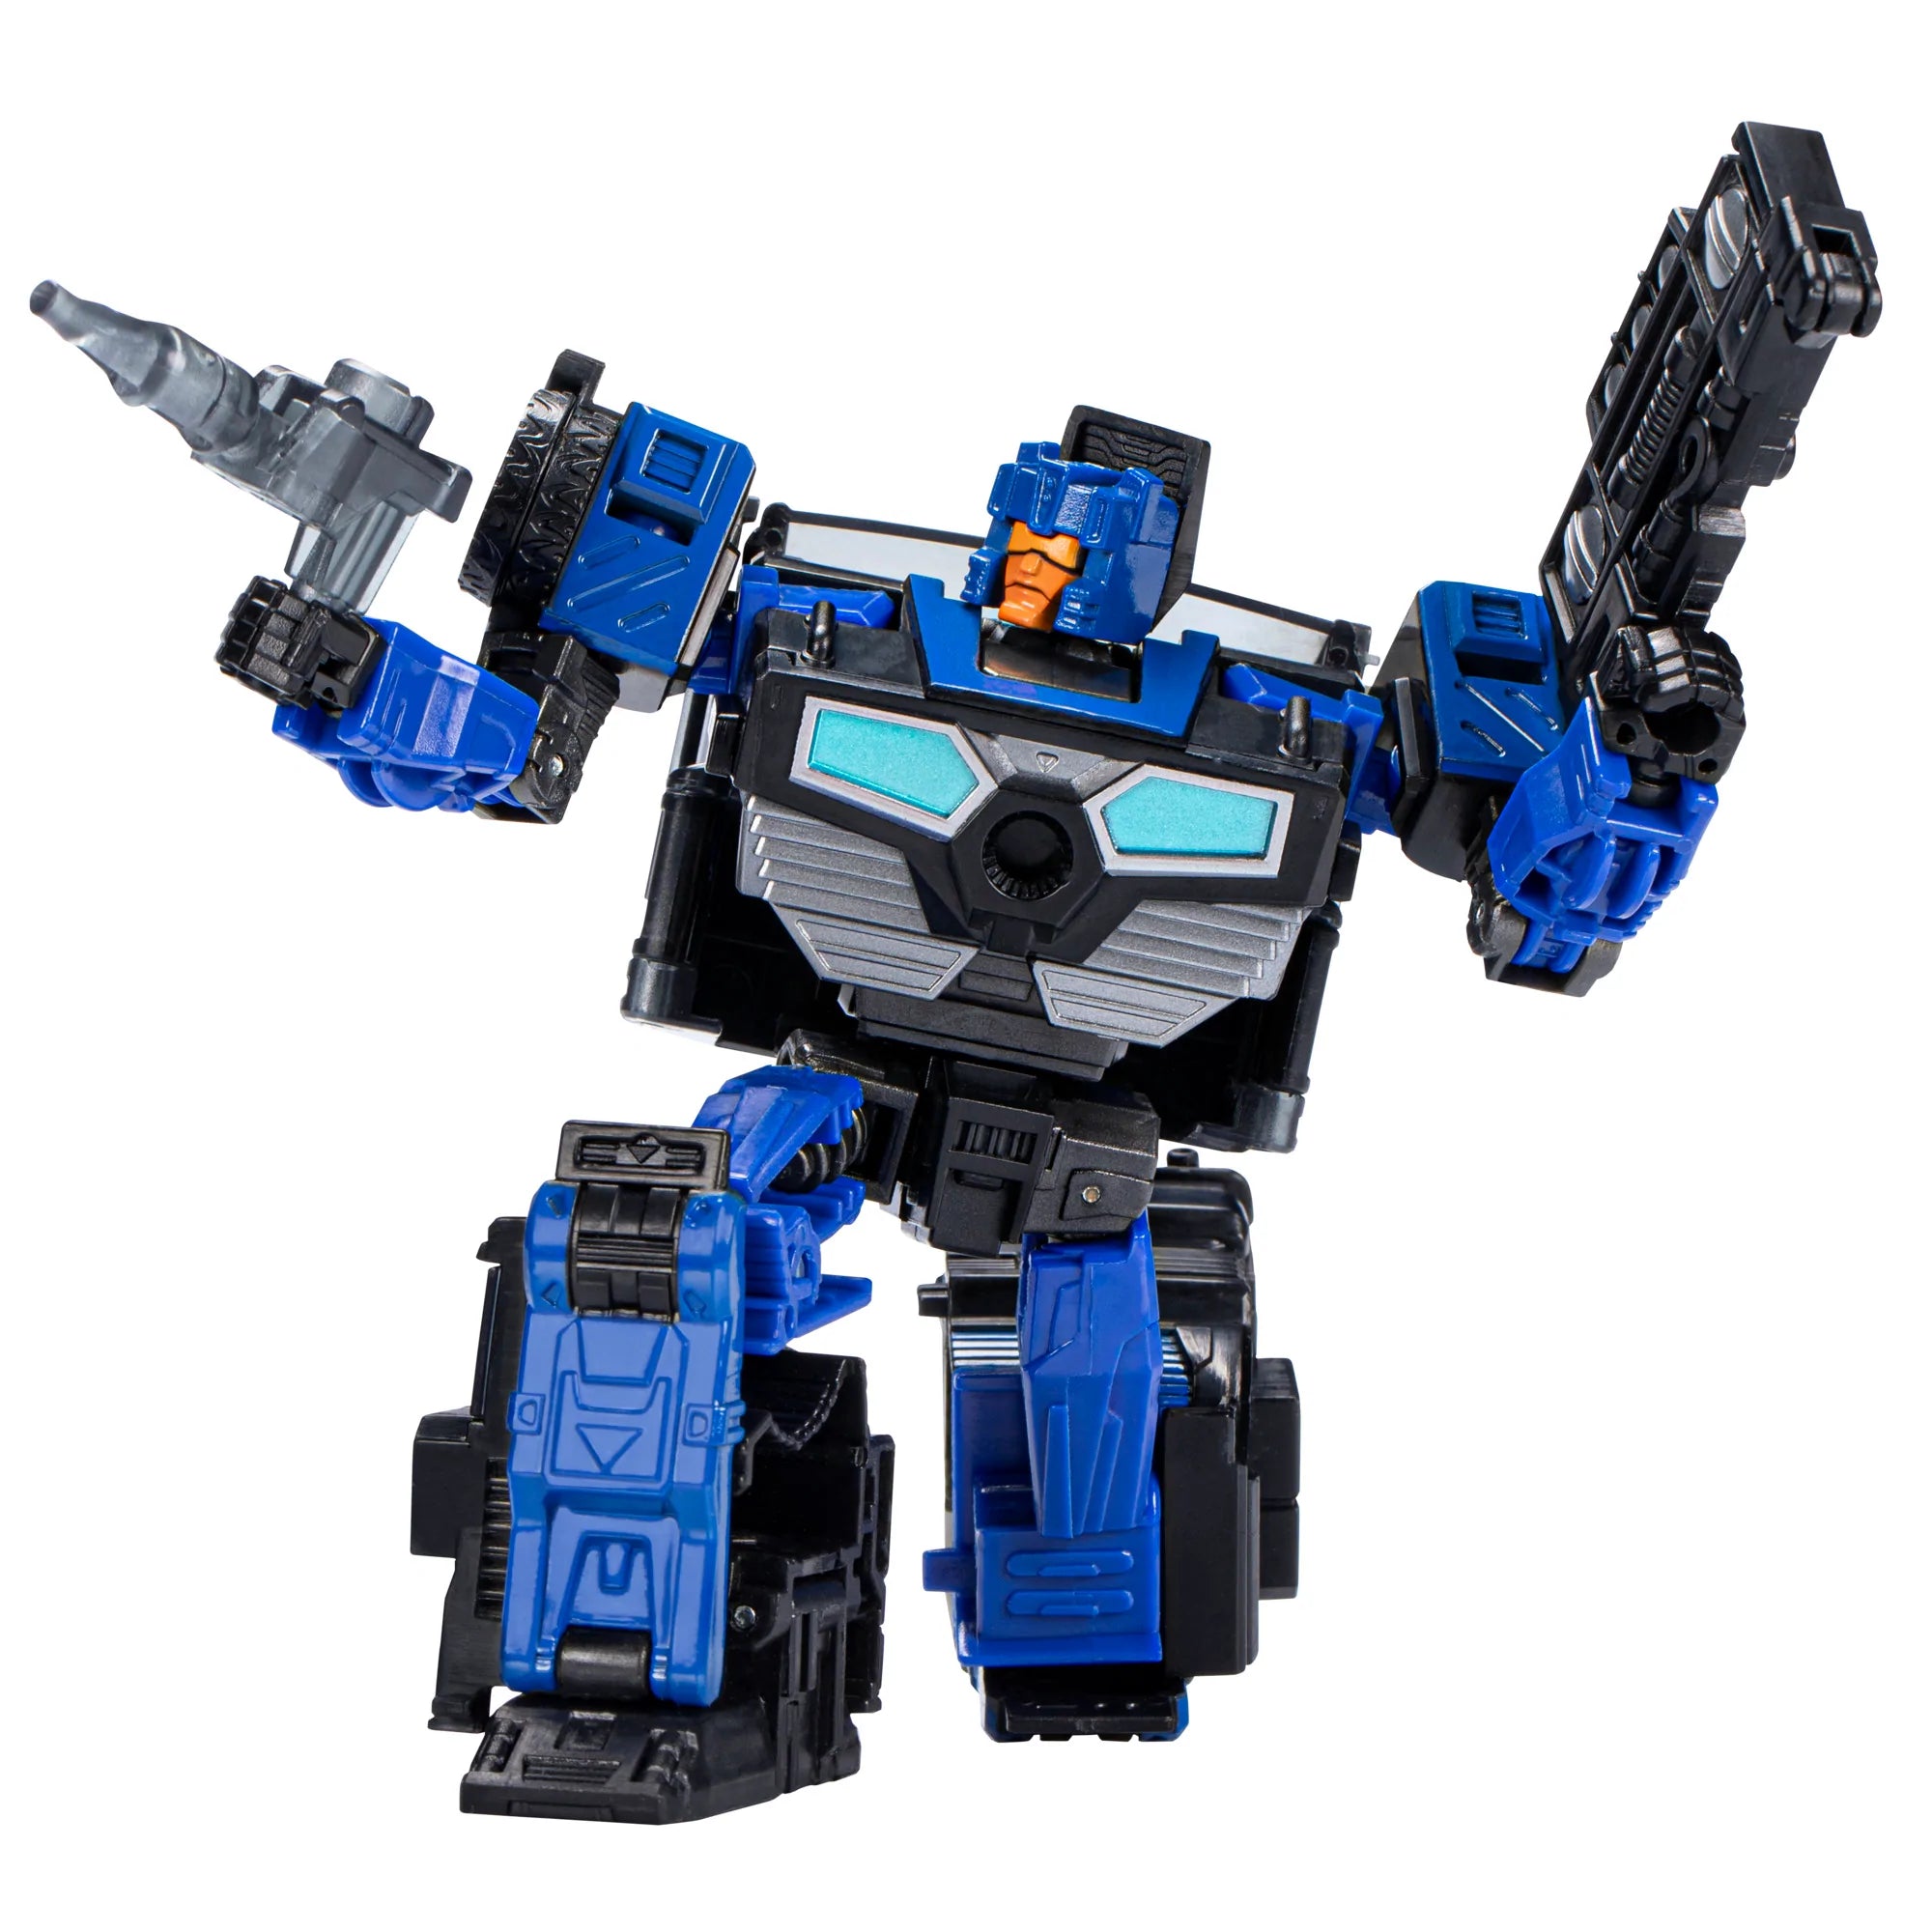 Hasbro - Transformers Generations Legacy - Deluxe Wave 3 - Crankcase - Marvelous Toys